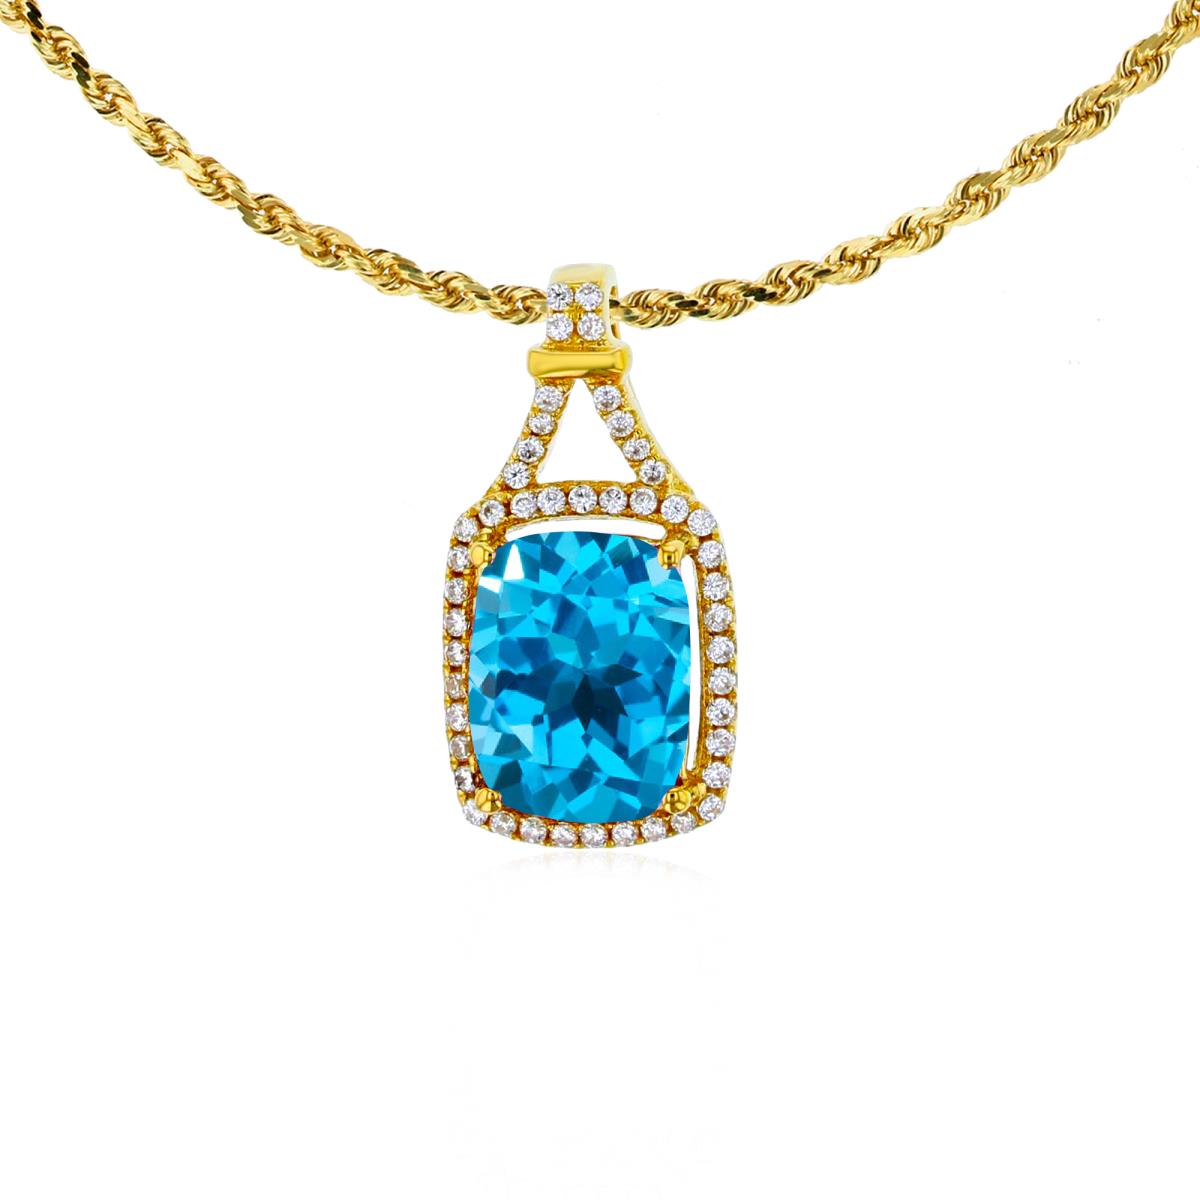 10K Yellow Gold 8x6mm Cushion Swiss Blue Topaz & 0.13 CTTW Rd Diamonds Halo 18" Rope Chain Necklace